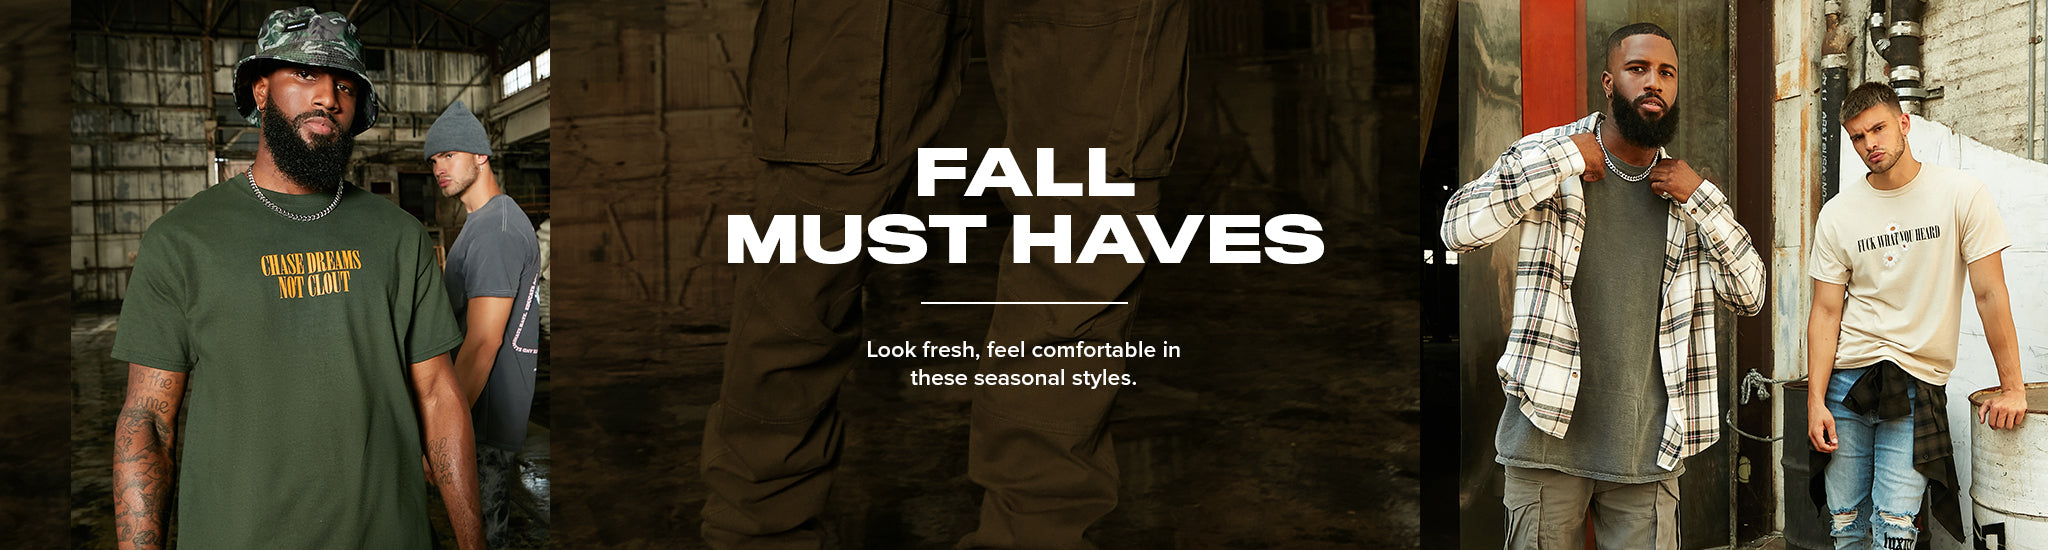 Men's Fall Must Haves